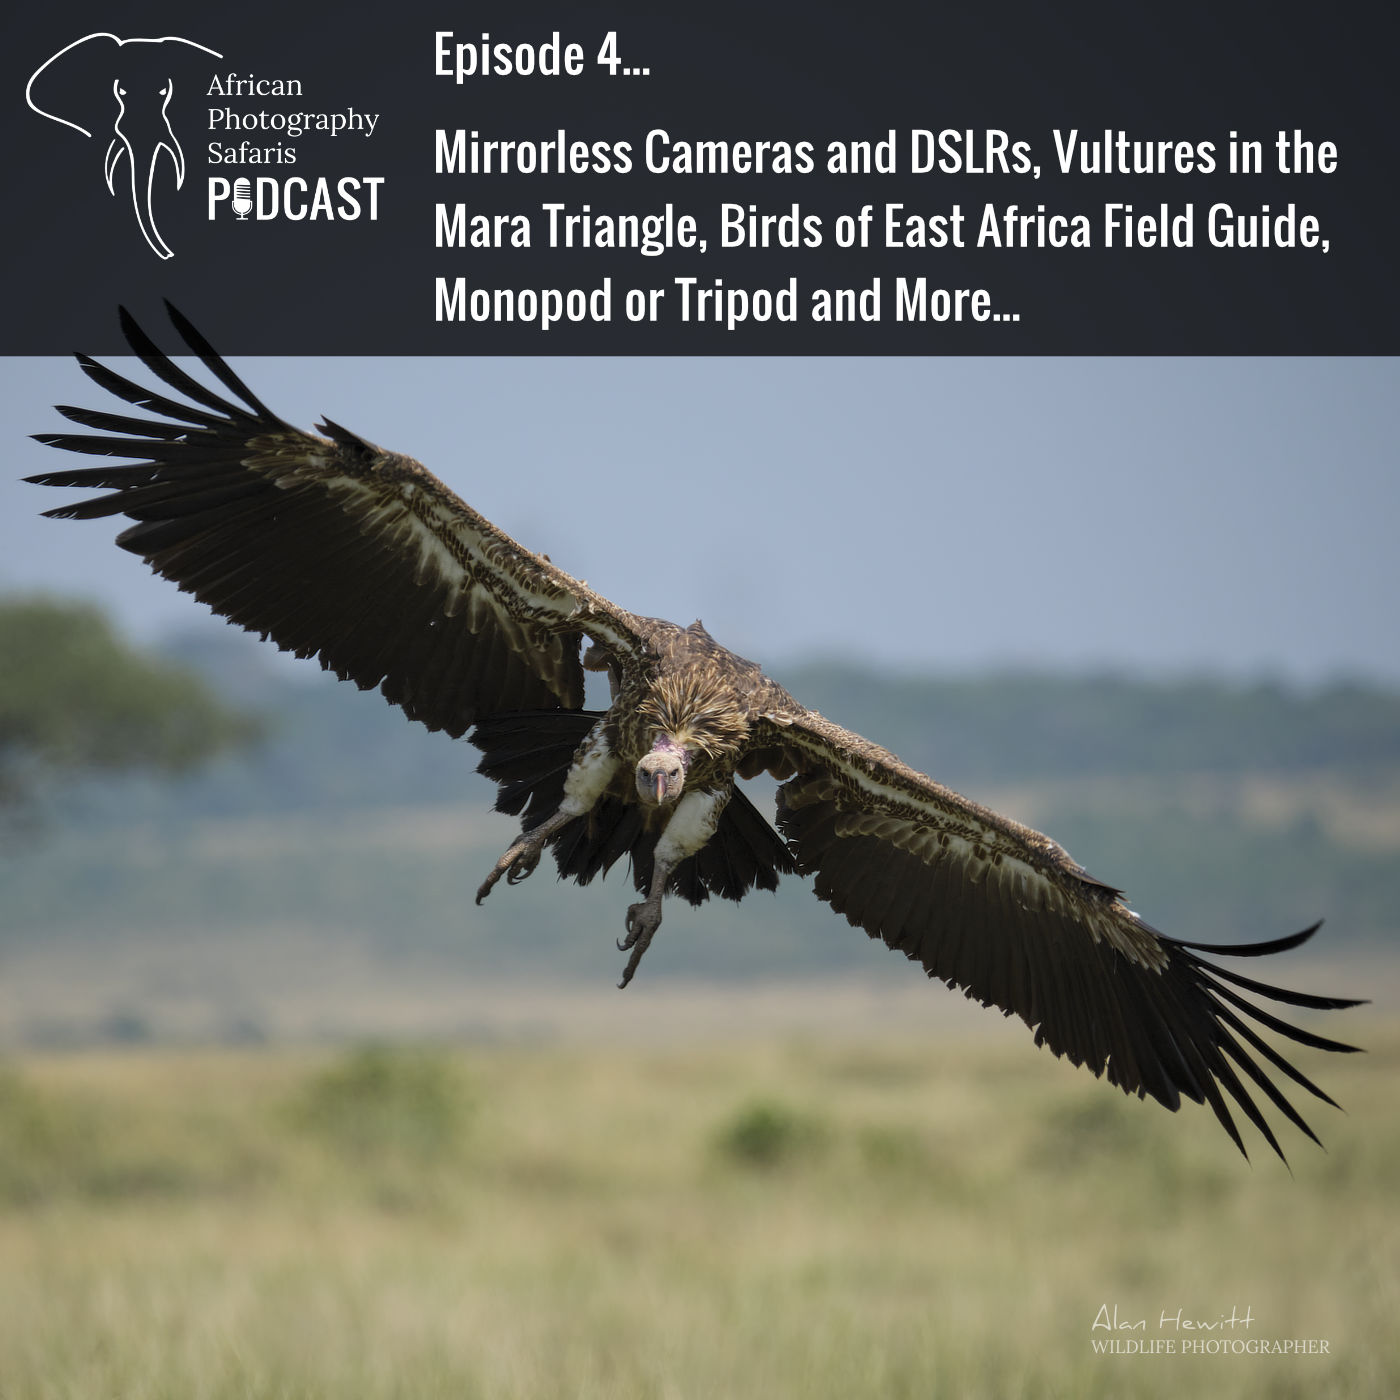 African Photography Safaris Podcast. Episode 4 - Mirrorless Cameras and DSLRs, Vultures in the Mara Triangle, Birds of East Africa Field Guide, Monopod and Tripod and More...